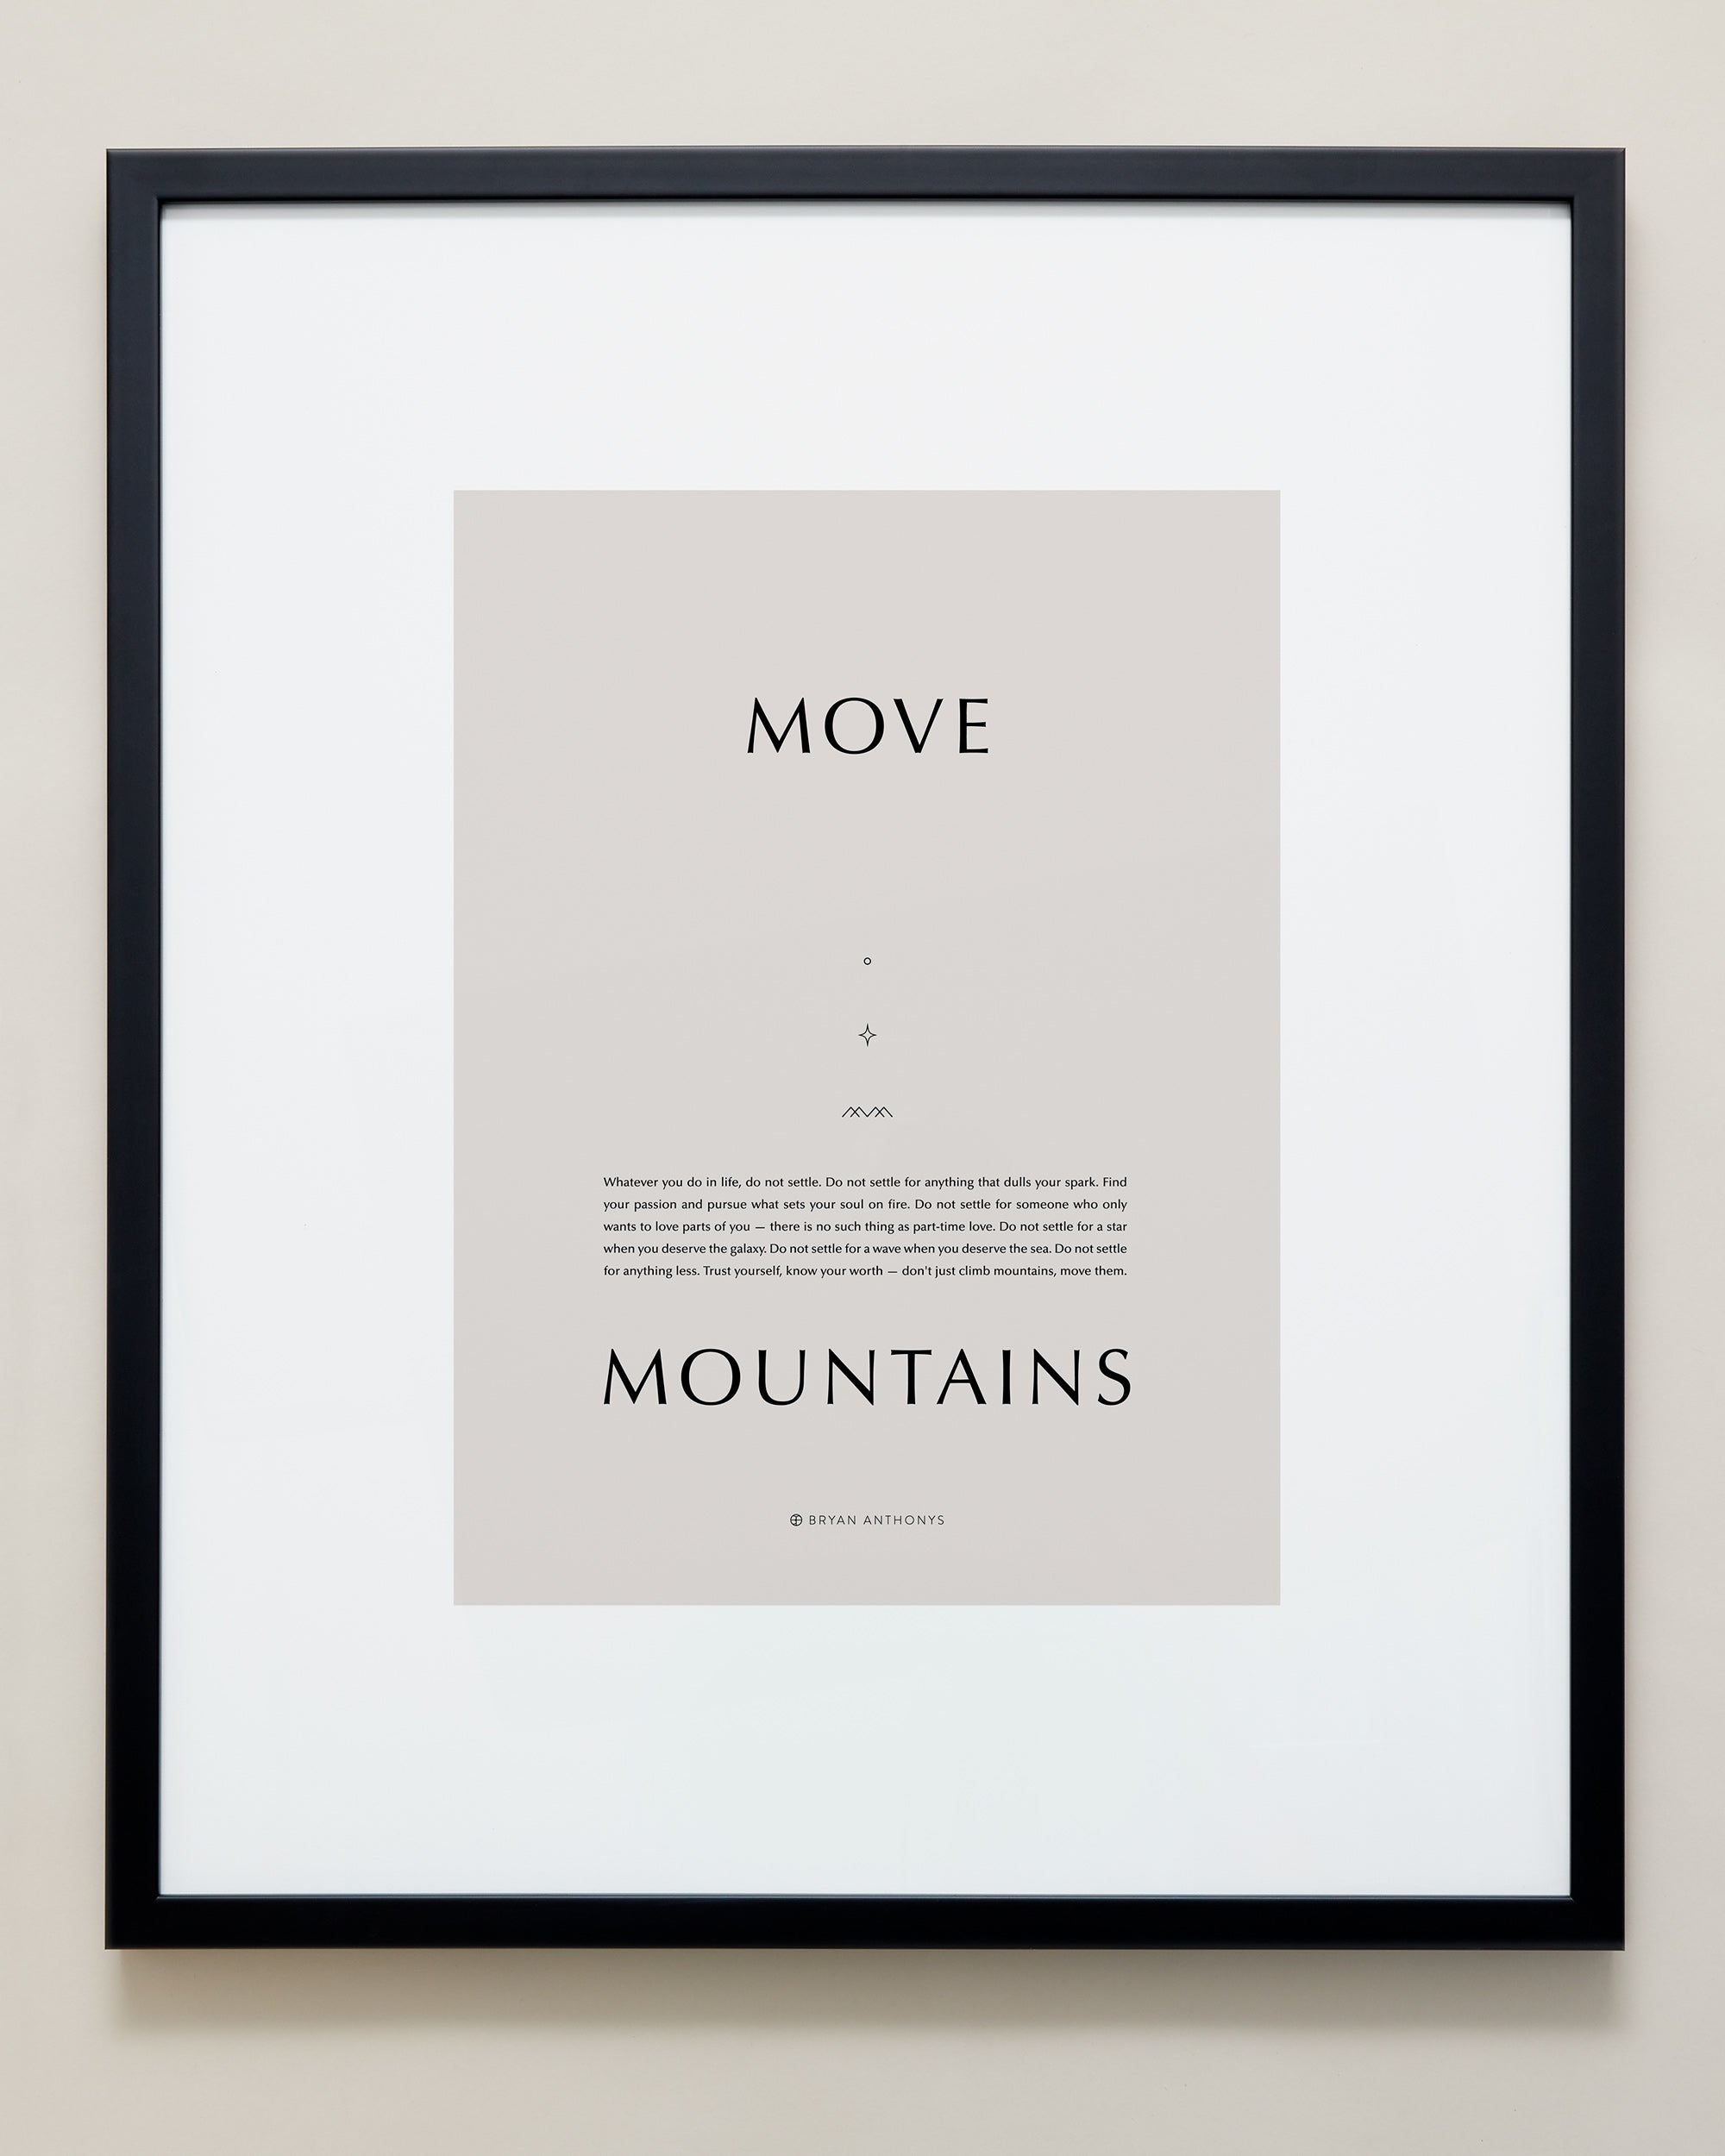 Bryan Anthonys Home Decor Purposeful Prints Move Mountains Iconic Framed Print Tan Art With Black Frame 20x24